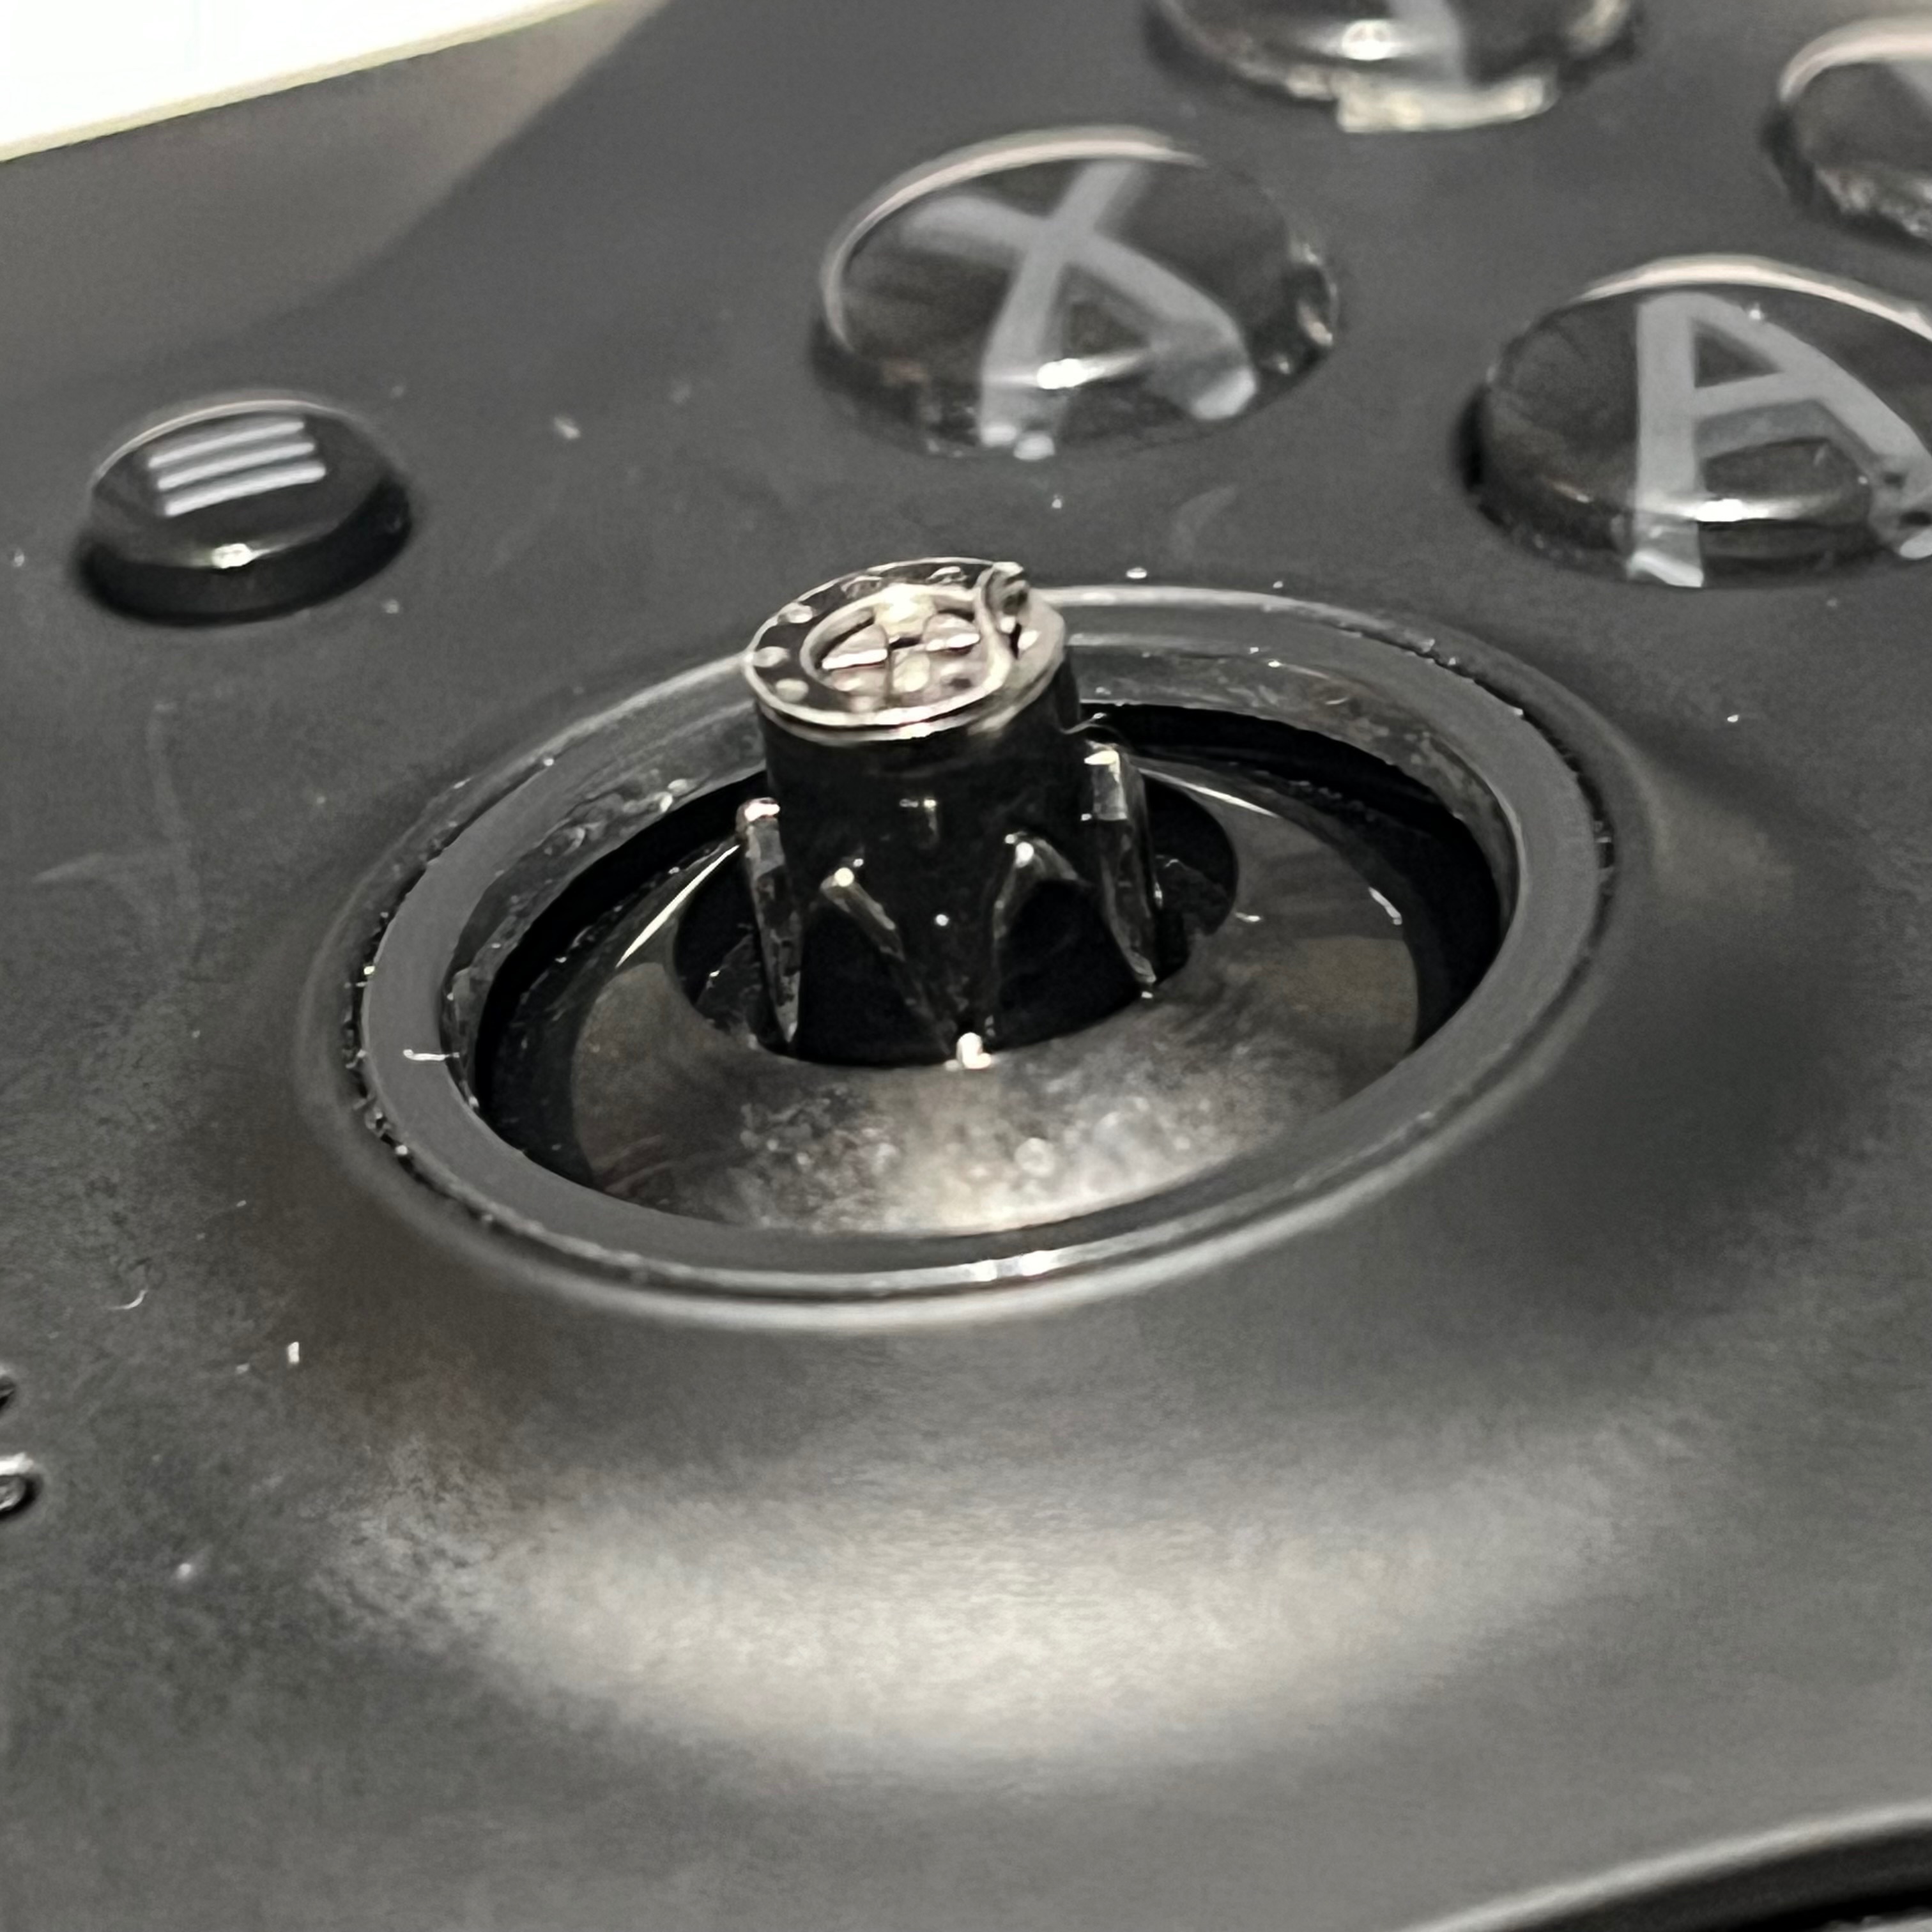 Hi so I have this strange problem with my elite series 2 controller. [​IMG]